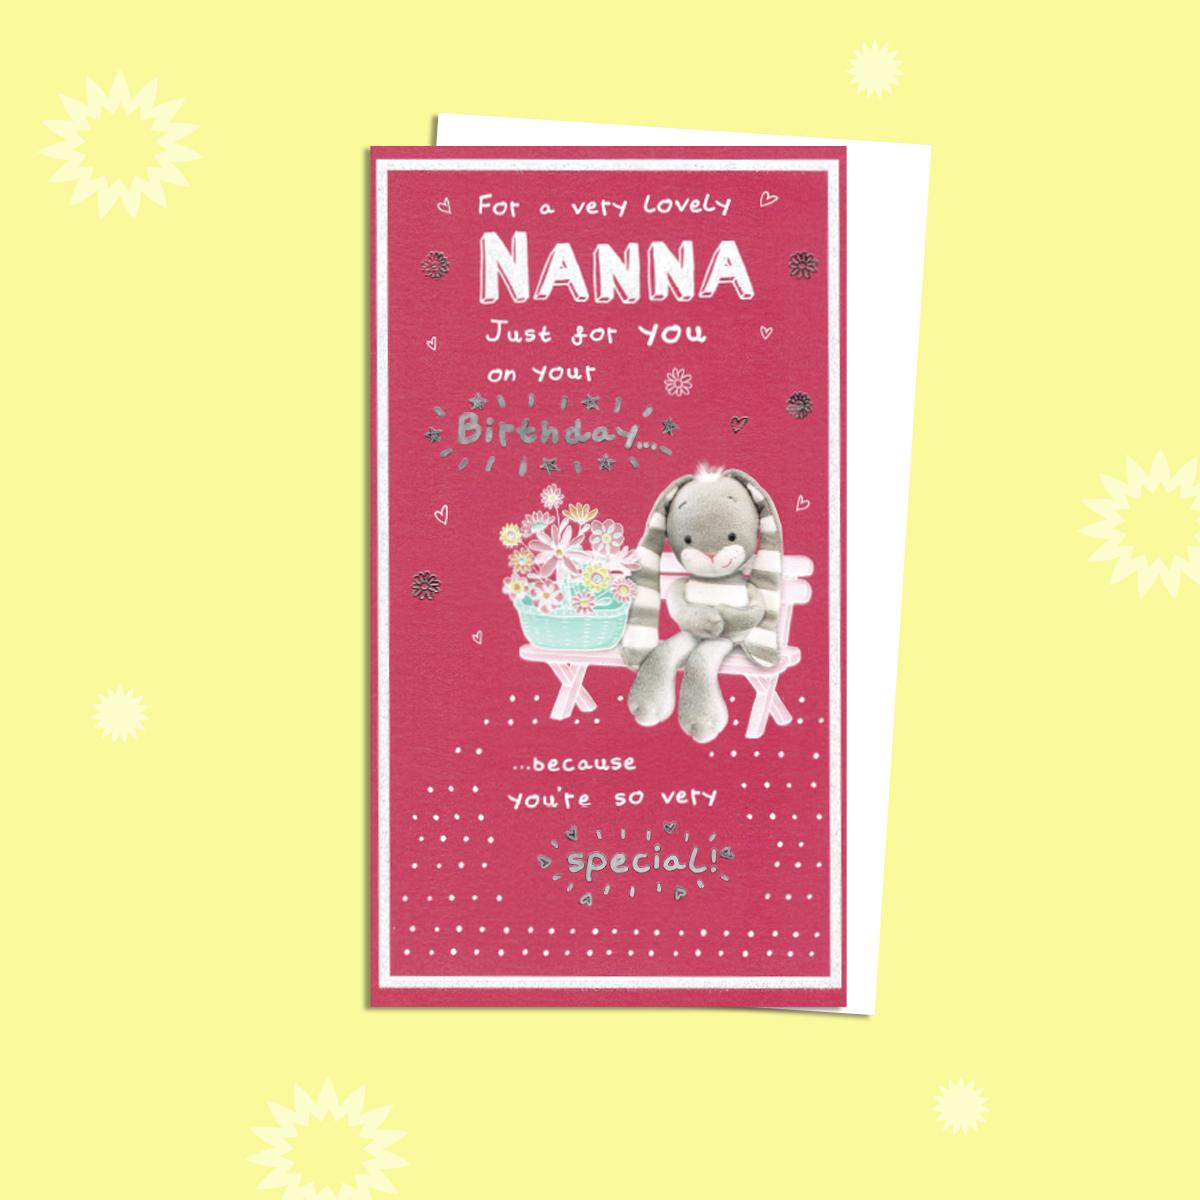 Nanny Birthday Card Featuring A Cute Bunny With A Basket Flowers